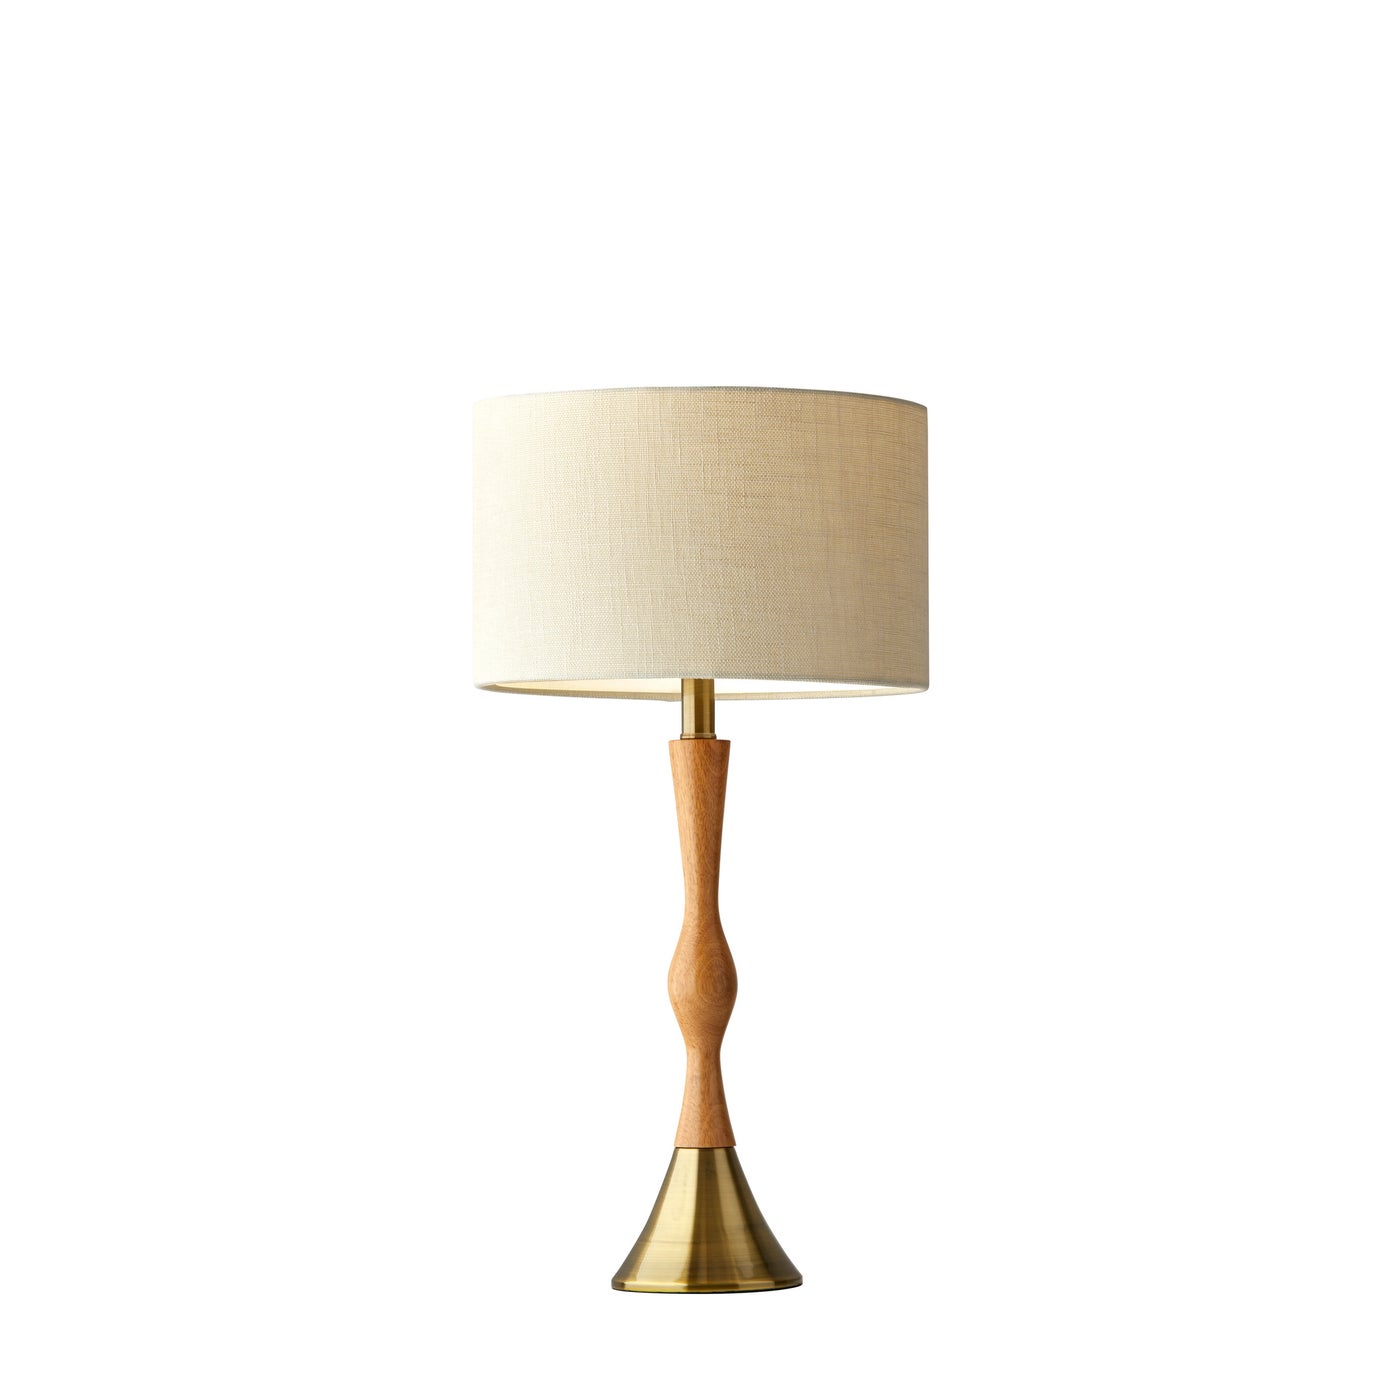 Adesso Home - 1576-12 - Table Lamp - Eve - Natural Oak Wood W. Antique Brass Accent